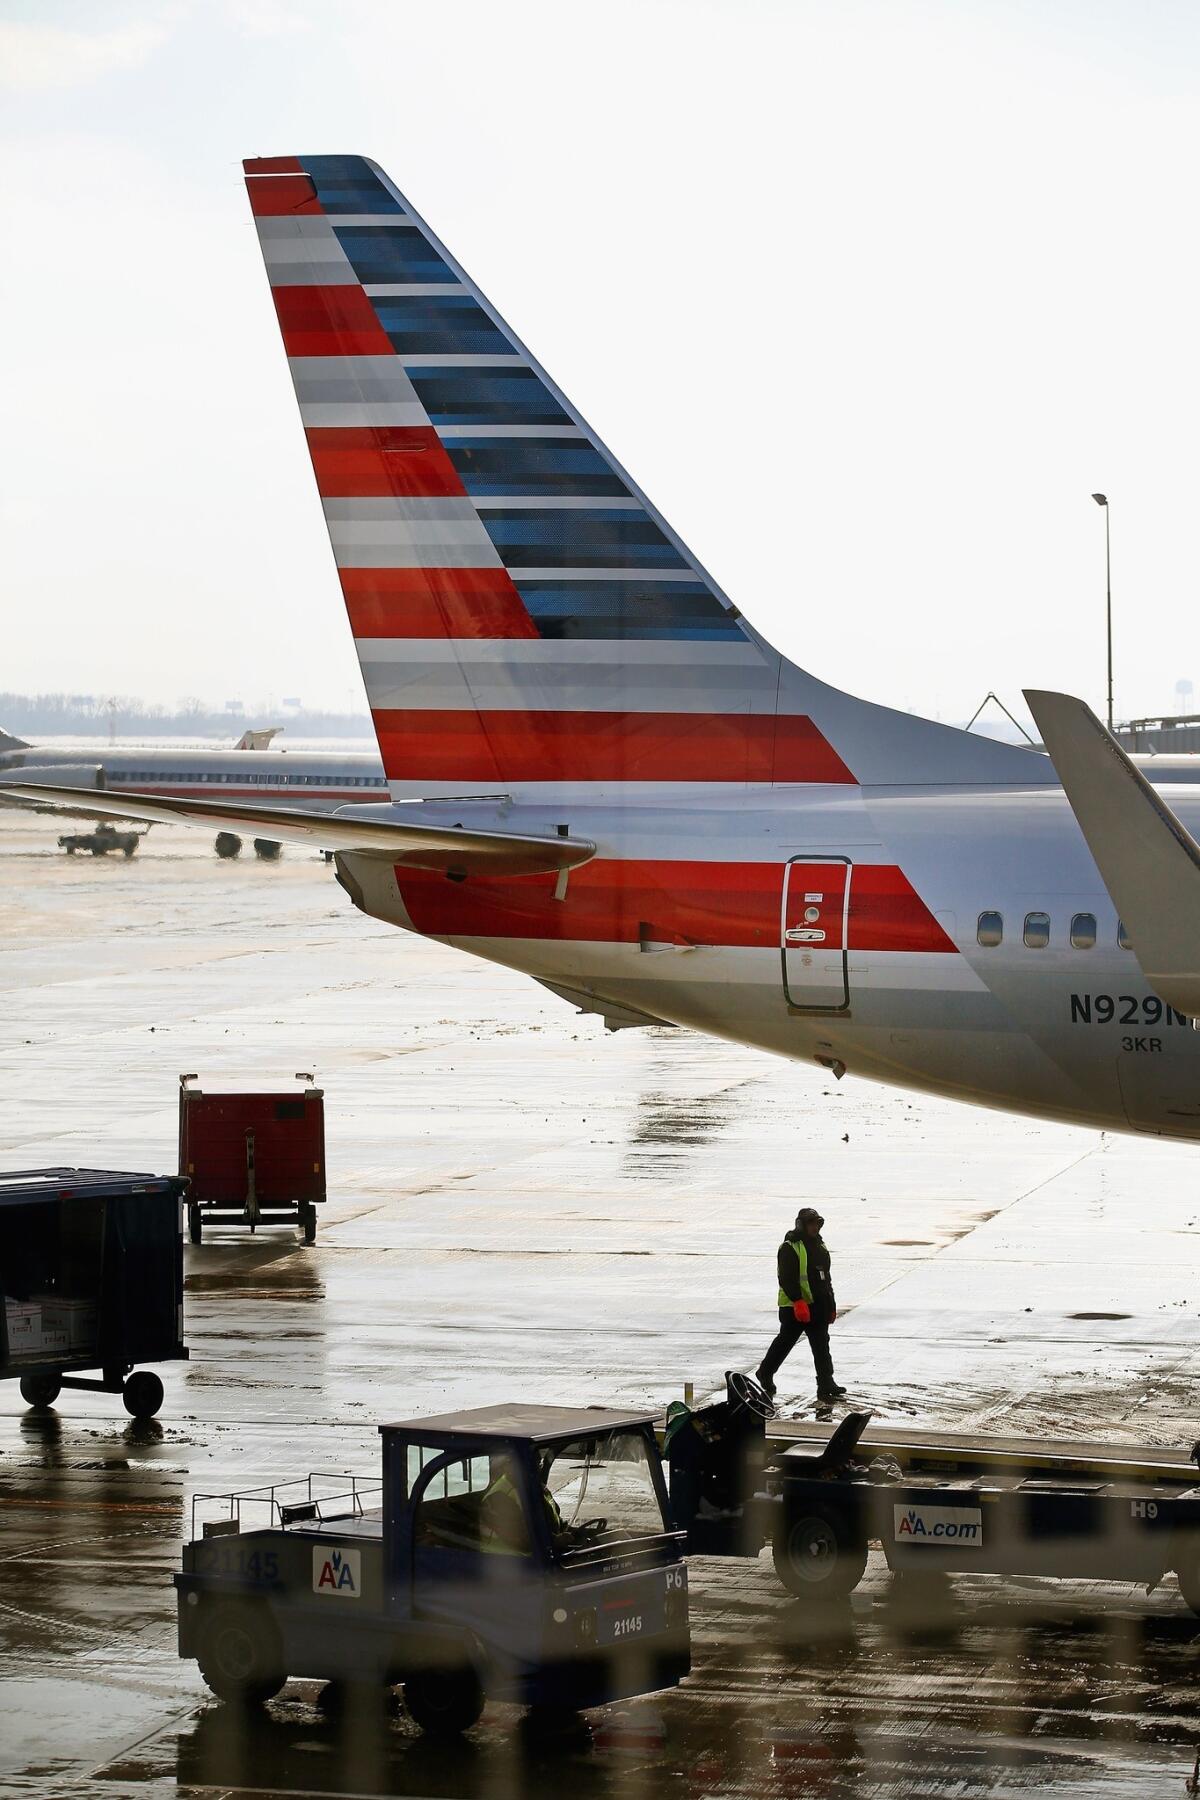 American Airlines will keep the new red, white and blue stripe design on its planes' tails.